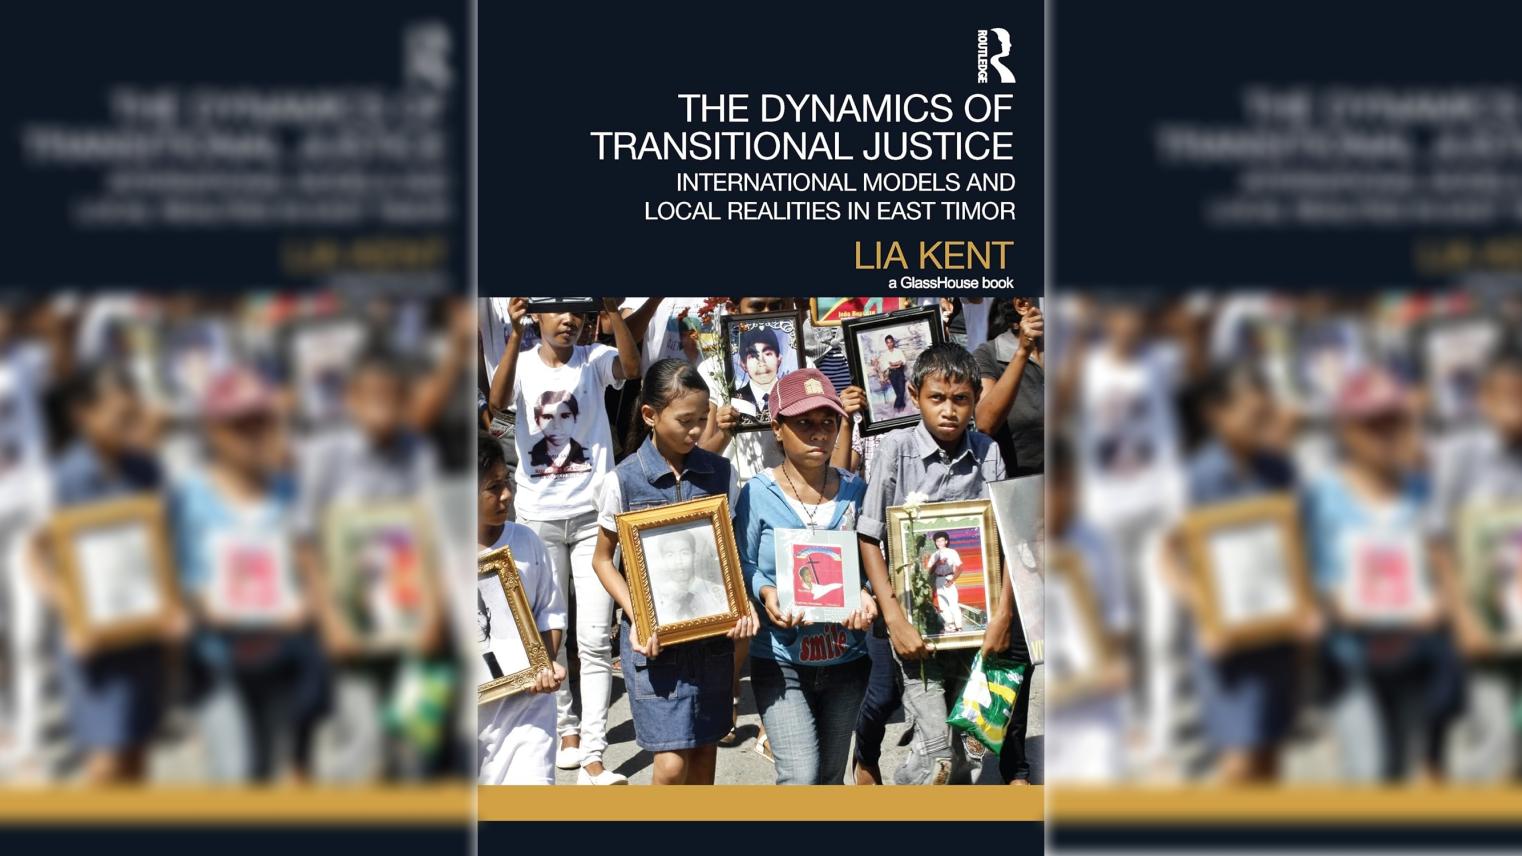  The Dynamics of Transitional Justice: International Models and Local Realities in East Timor